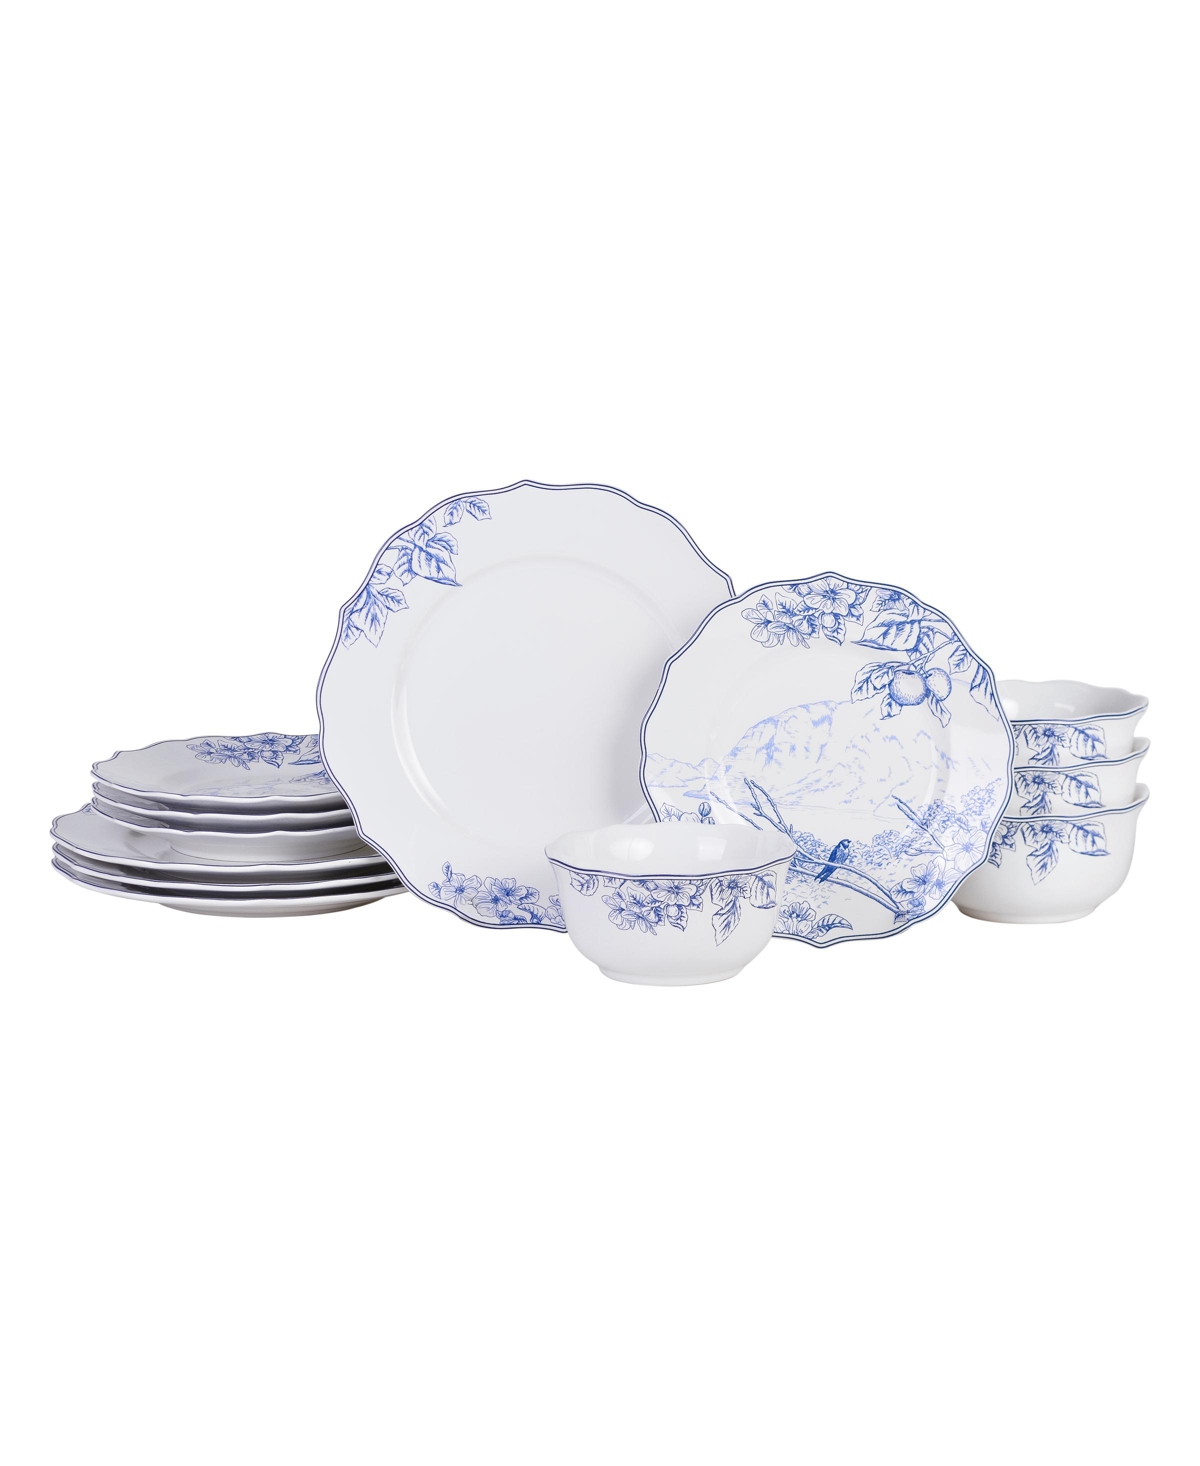 Hudson Valley Decal on White Background Porcelain 12 Pc Dinnerware Set, Service for 4 - Green